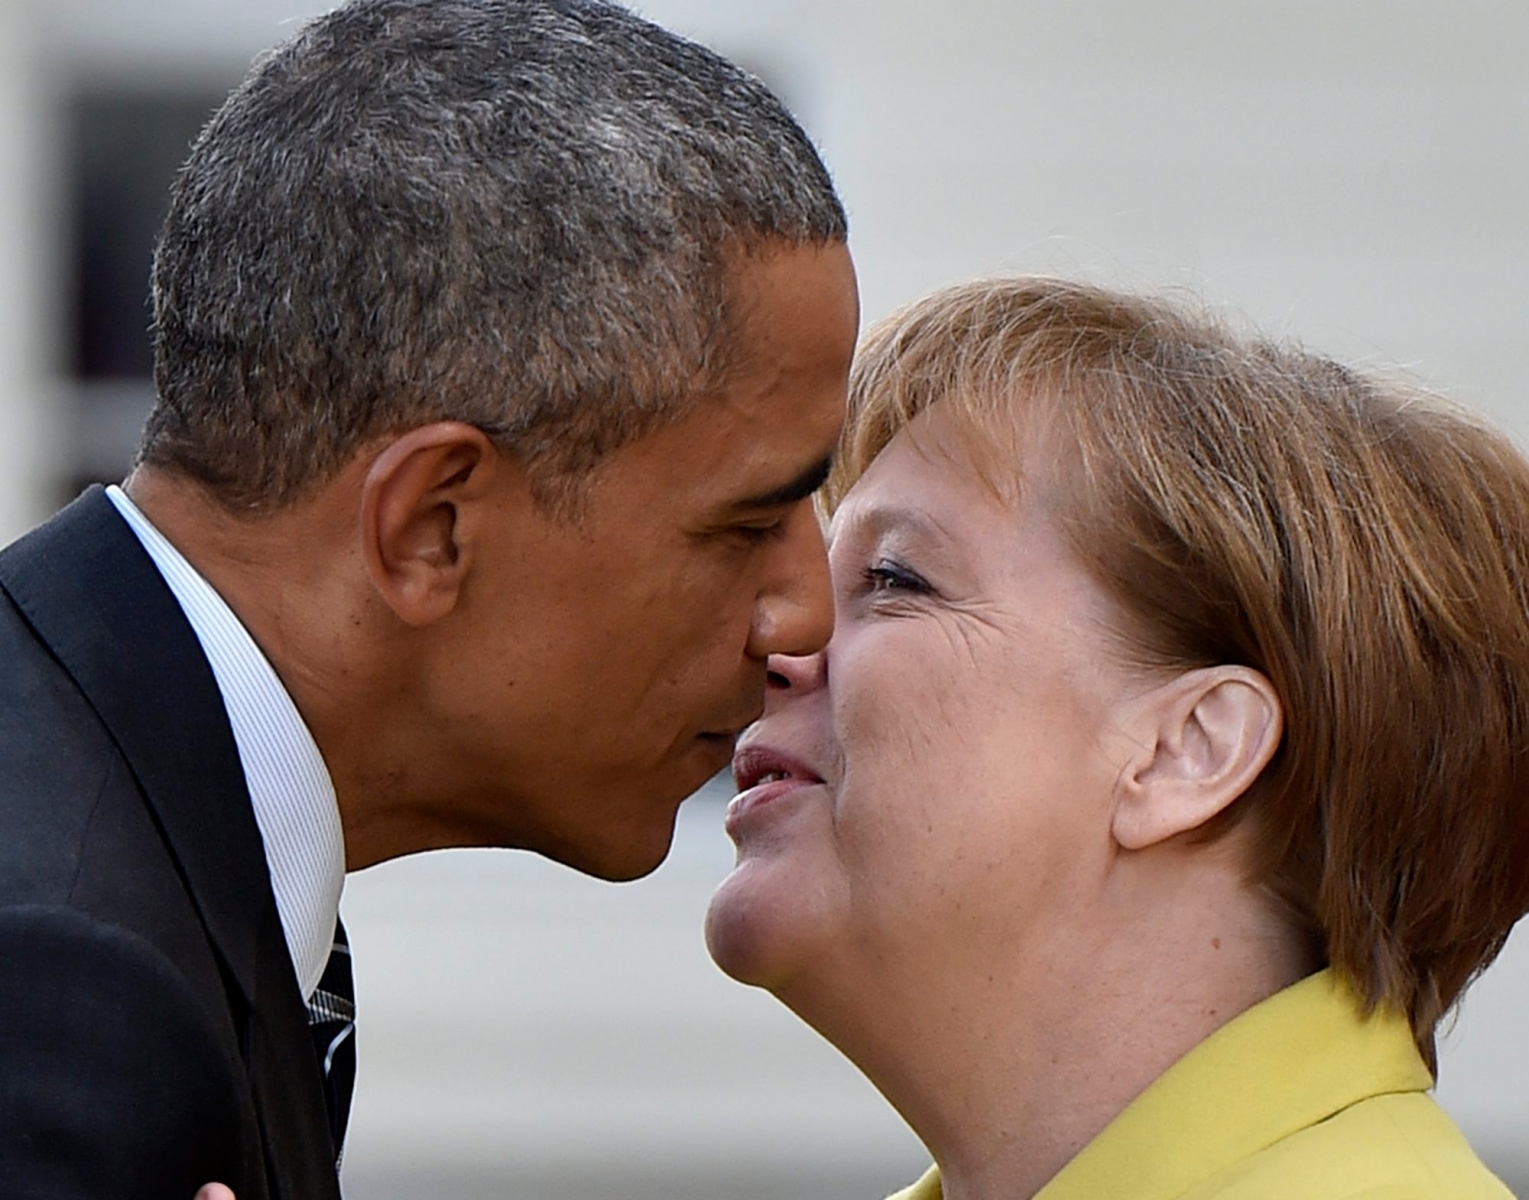 German Chancellor Angela Merkel, right, welcomes U.S. President Barack Obama at Herrenhaus Palace in Hannover, northern Germany, Sunday, April 24, 2016. Obama is on a two-day official visit to Germany. (AP Photo/Martin Meissner) Germany Obama